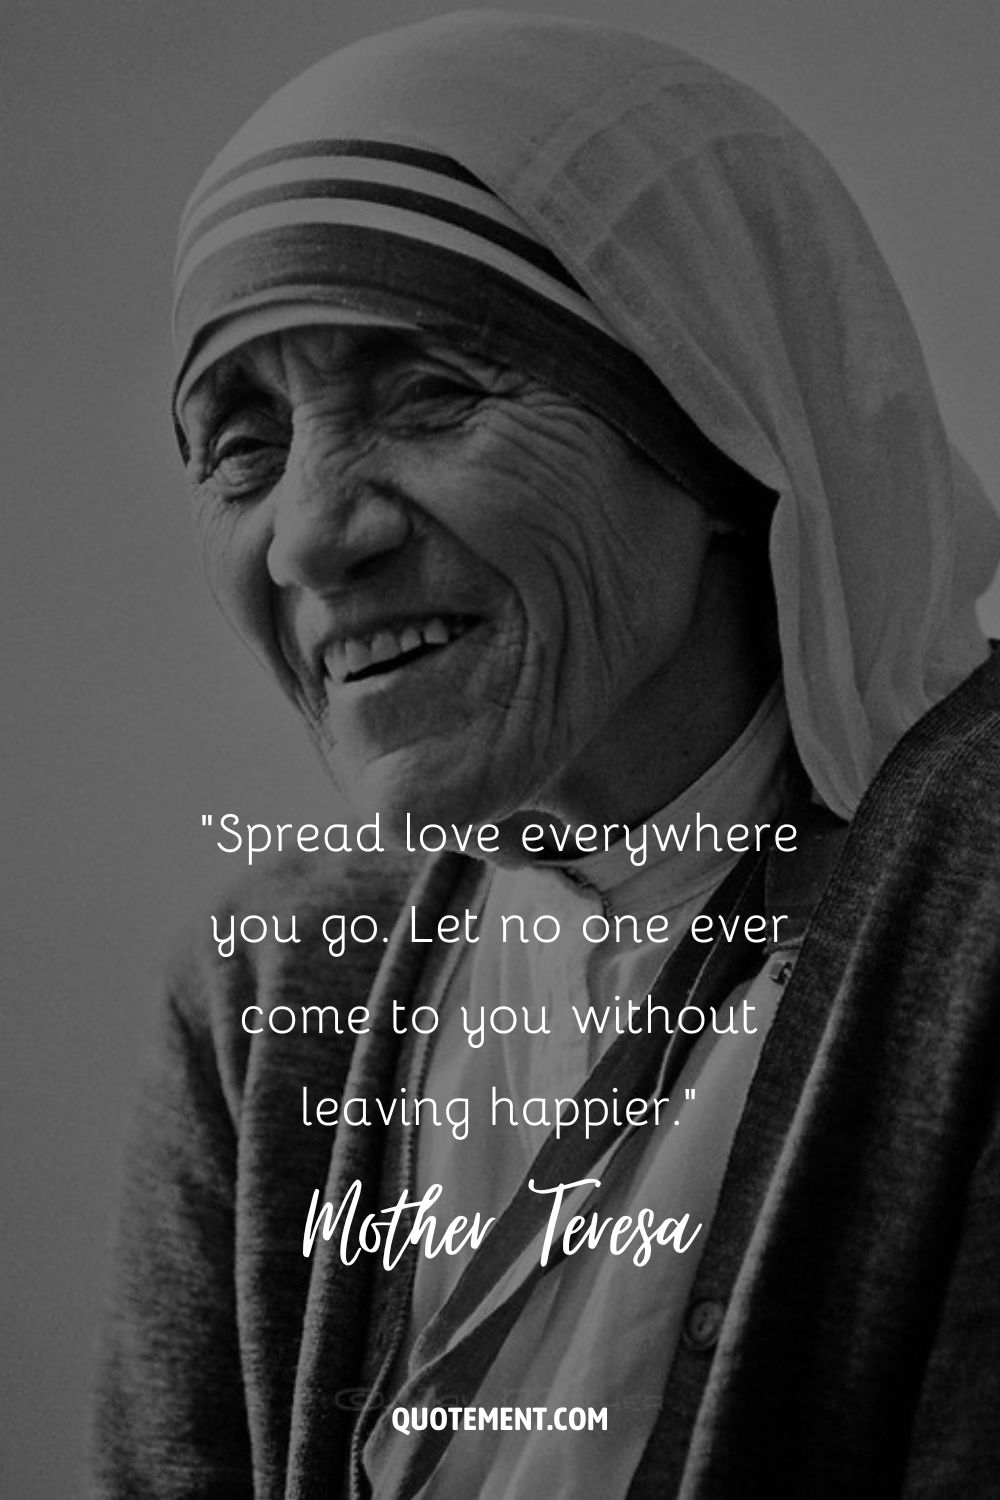 A black and white image of smiling Mother Teresa representing the greatest Mother Teresa quote